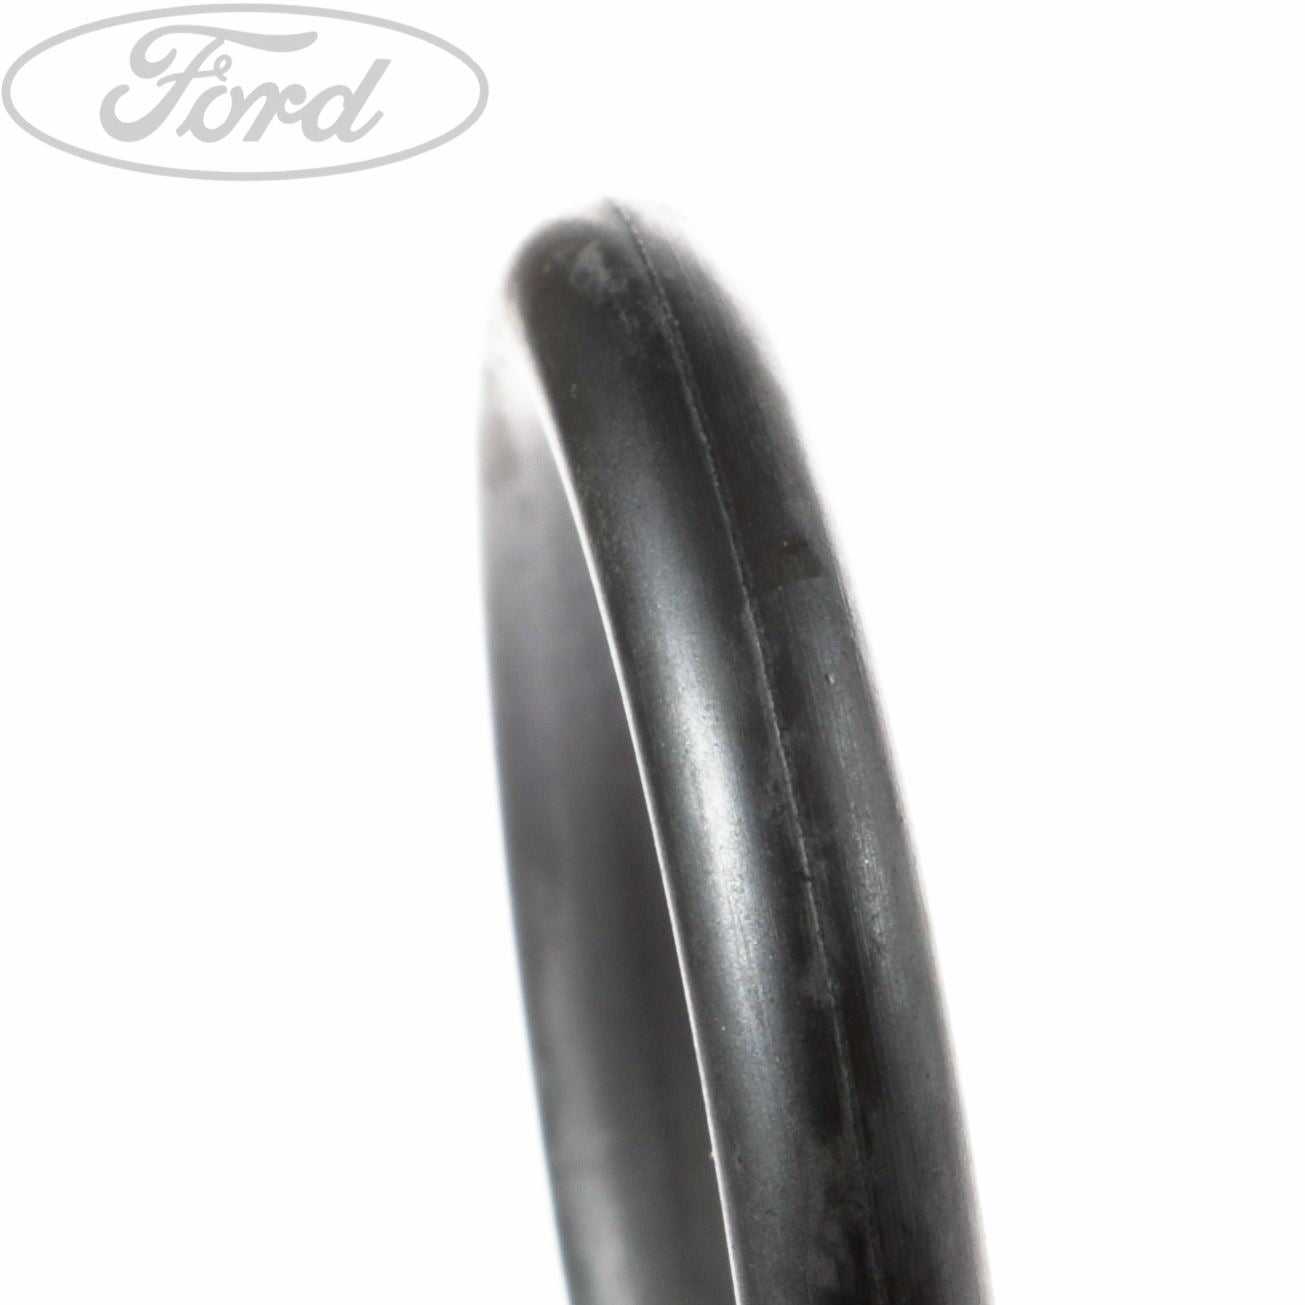 Ford, THERMOSTAT HOUSING GASKET